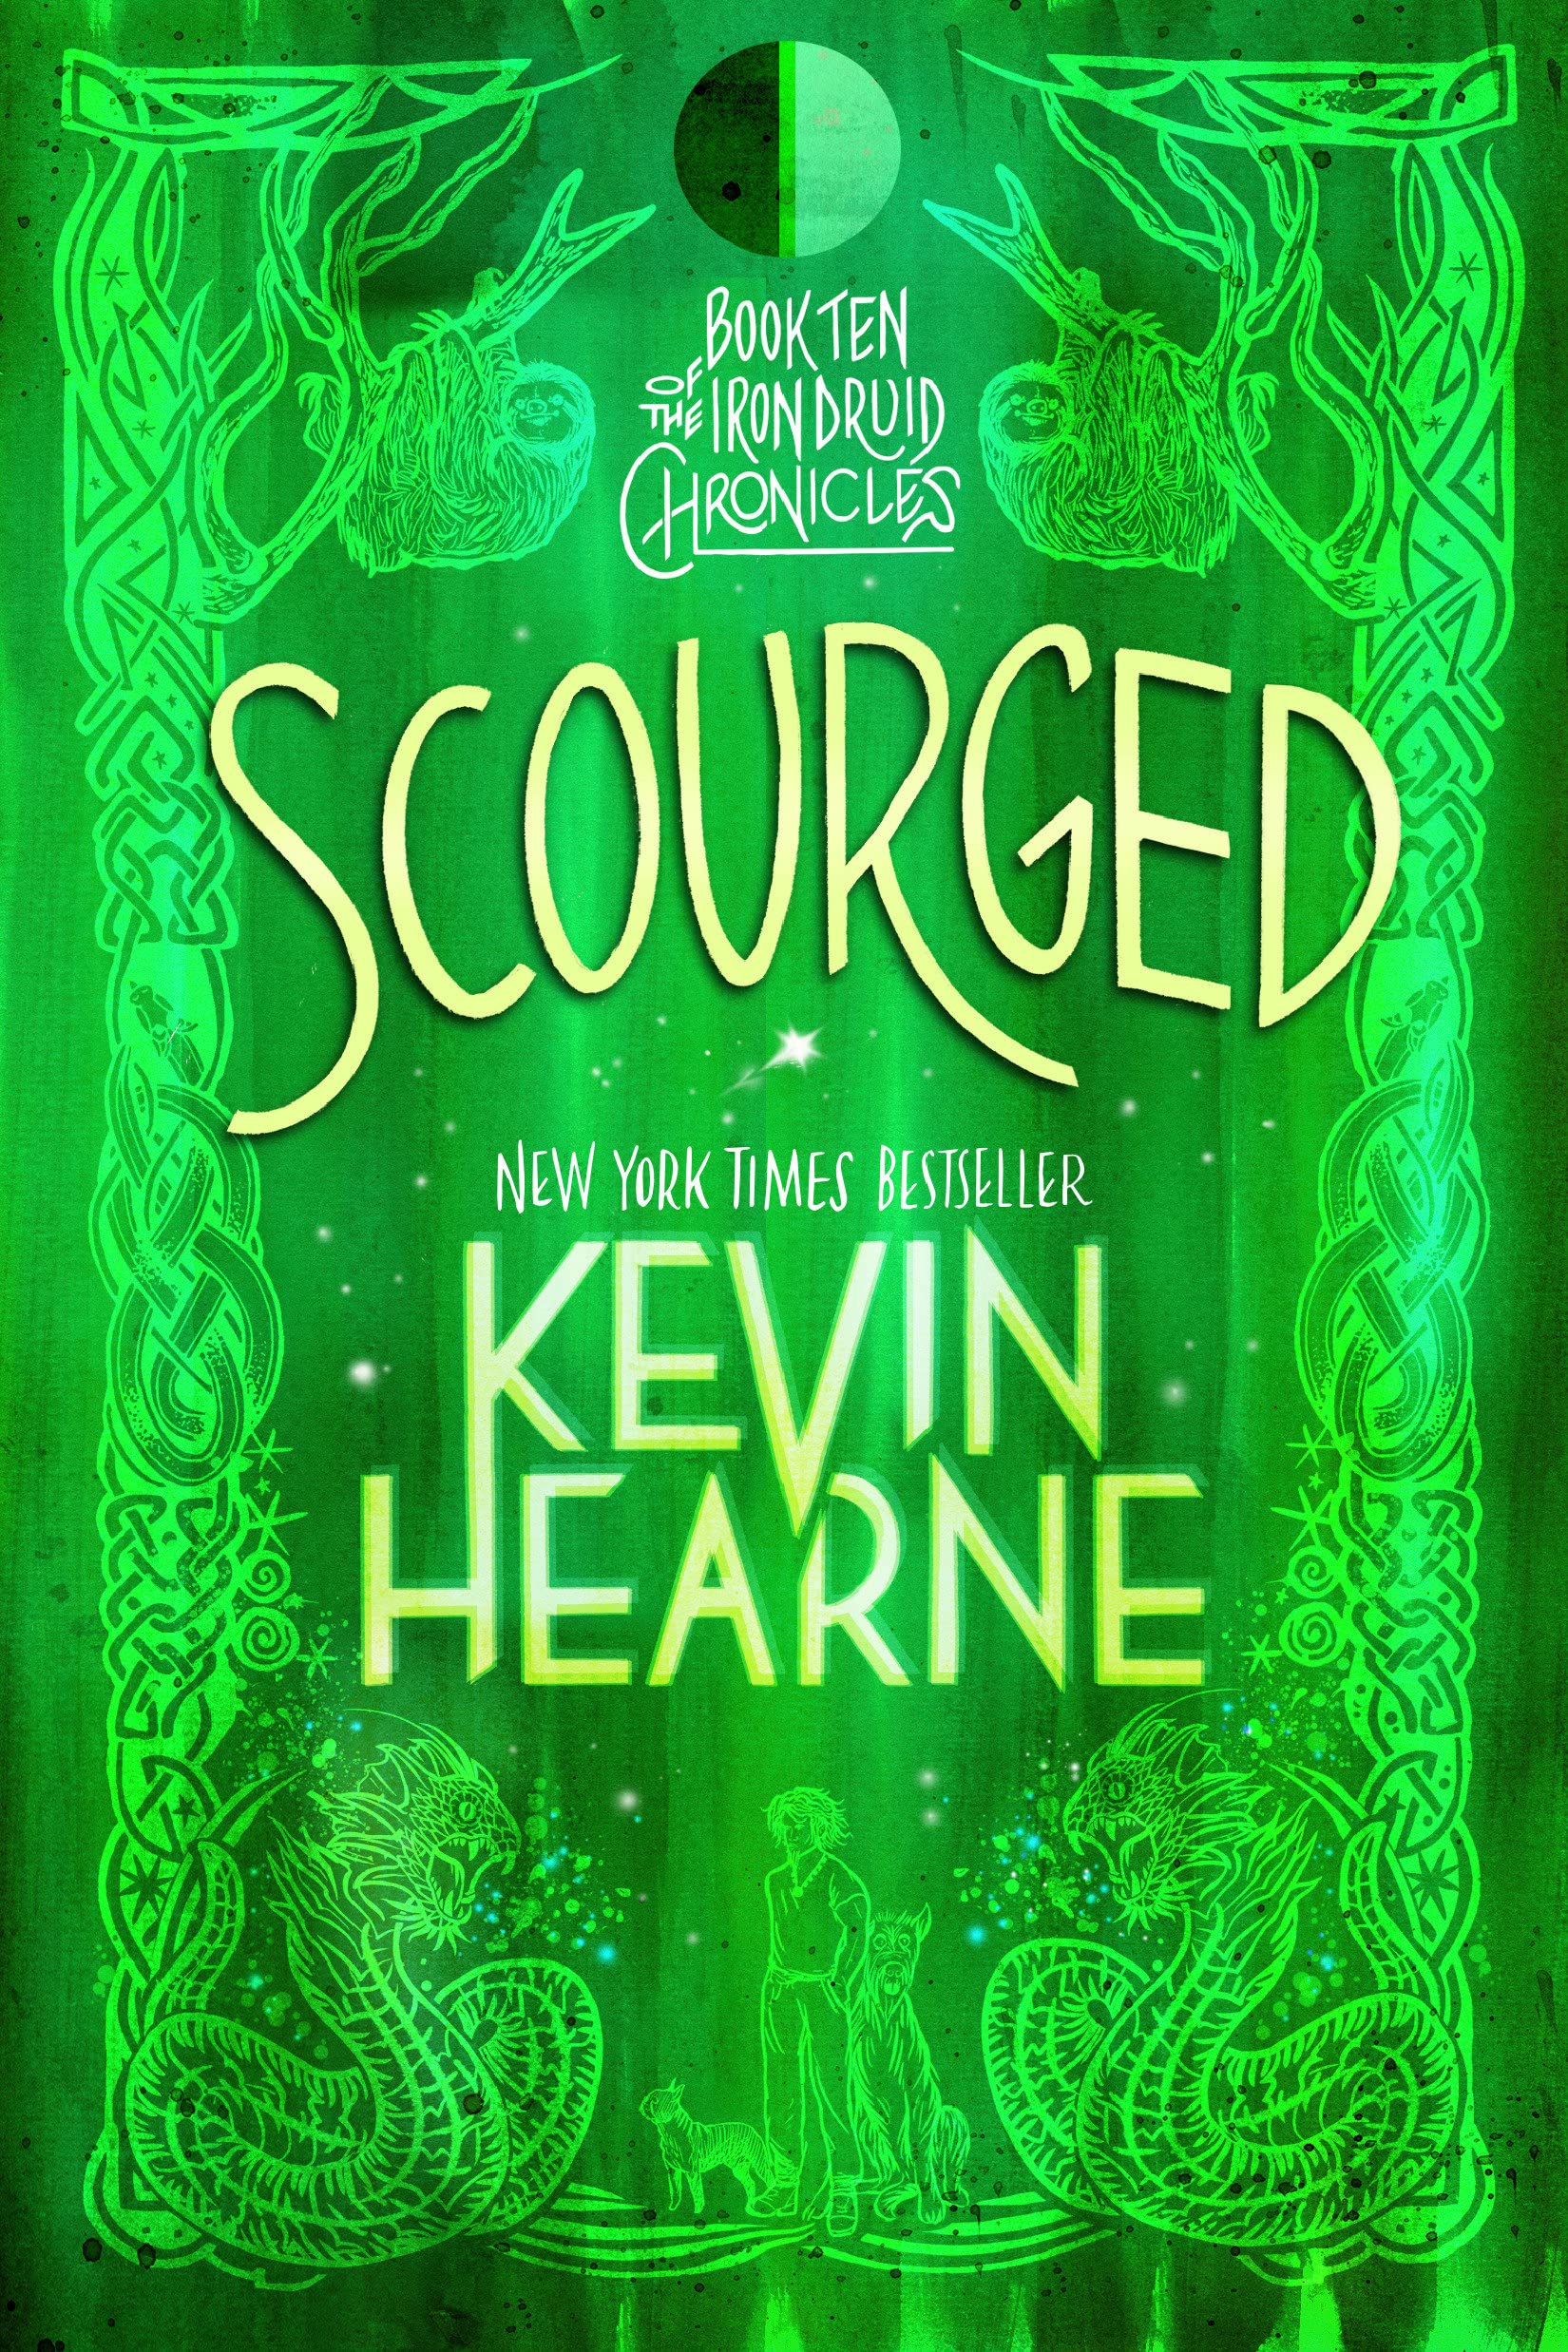 Kevin Hearne: Scourged (2018)